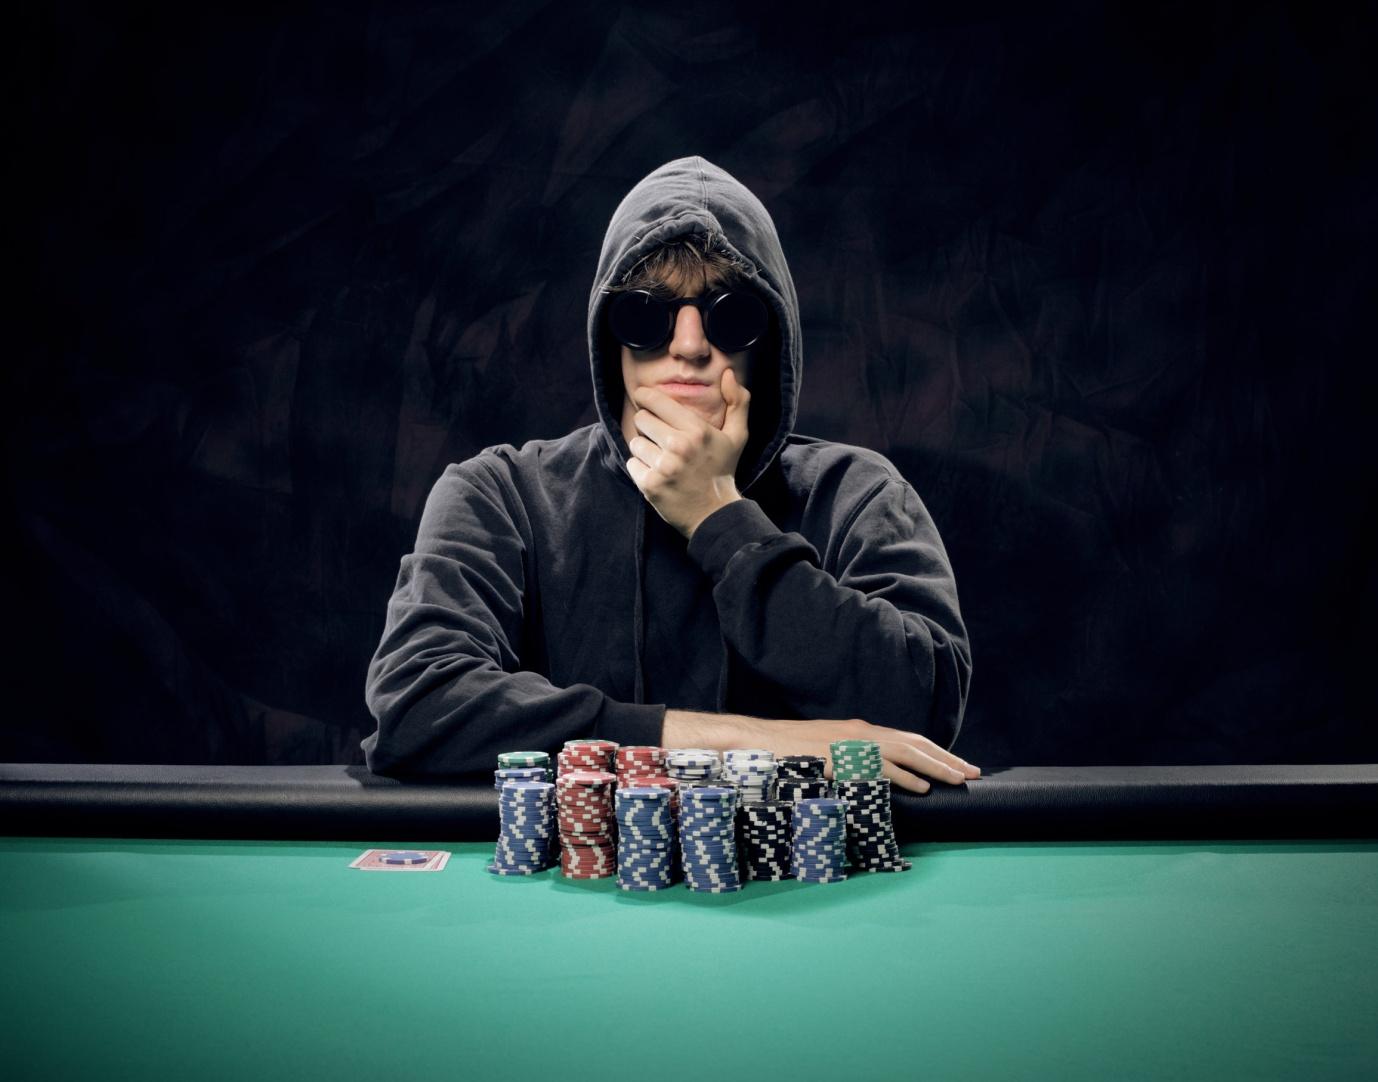 A person wearing a mask and sitting at a table with poker chips

Description automatically generated with low confidence